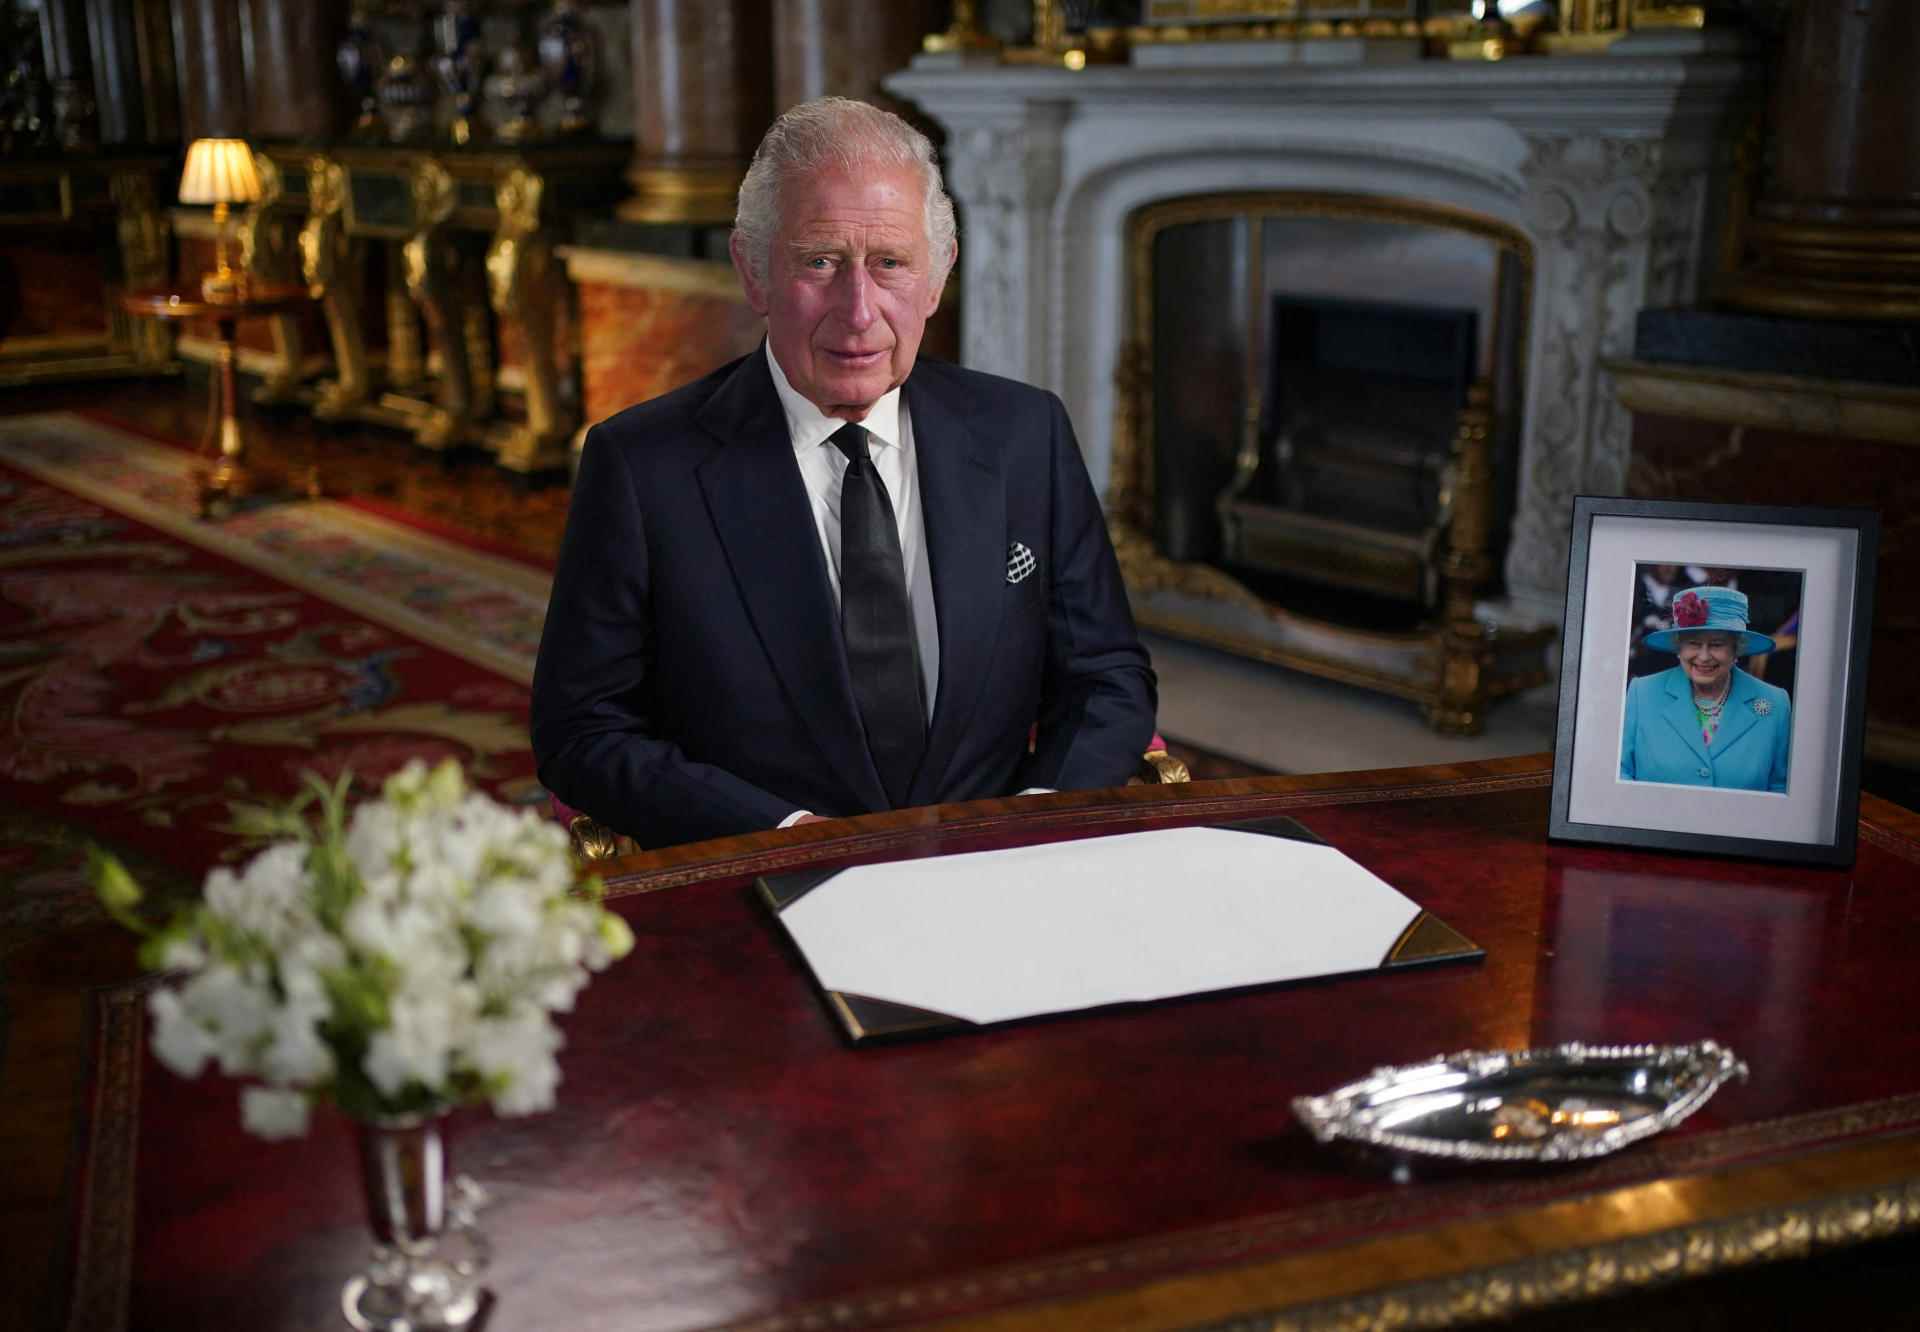 King Charles III delivers his address to the nation and the Commonwealth from Buckingham Palace in London on September 9, 2022.